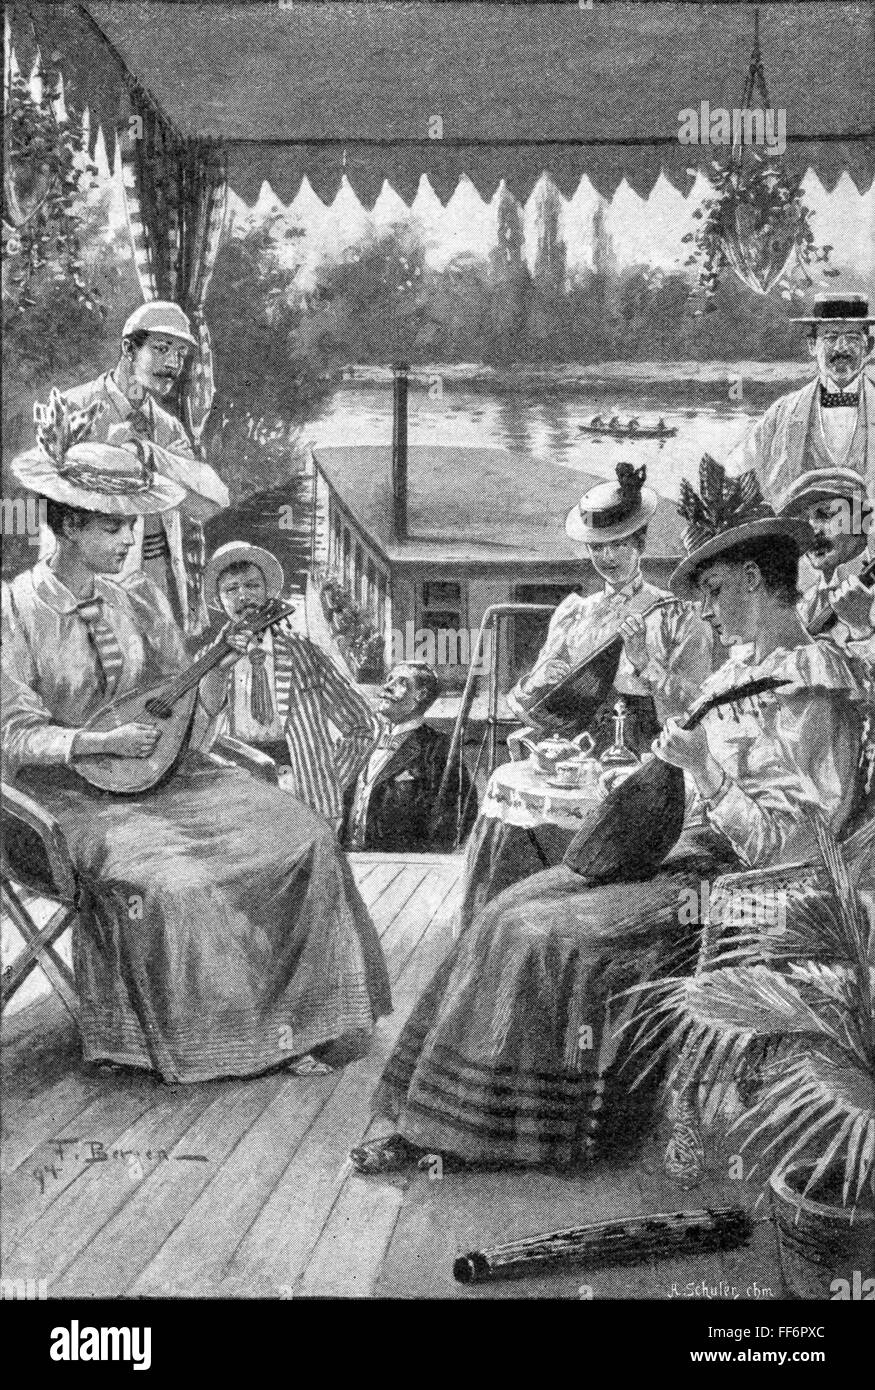 tourism, group making music on a houseboat, after Fritz Bergen (1857 - 1941), lithograph by A.Schuler, circa 1900, Additional-Rights-Clearences-Not Available Stock Photo